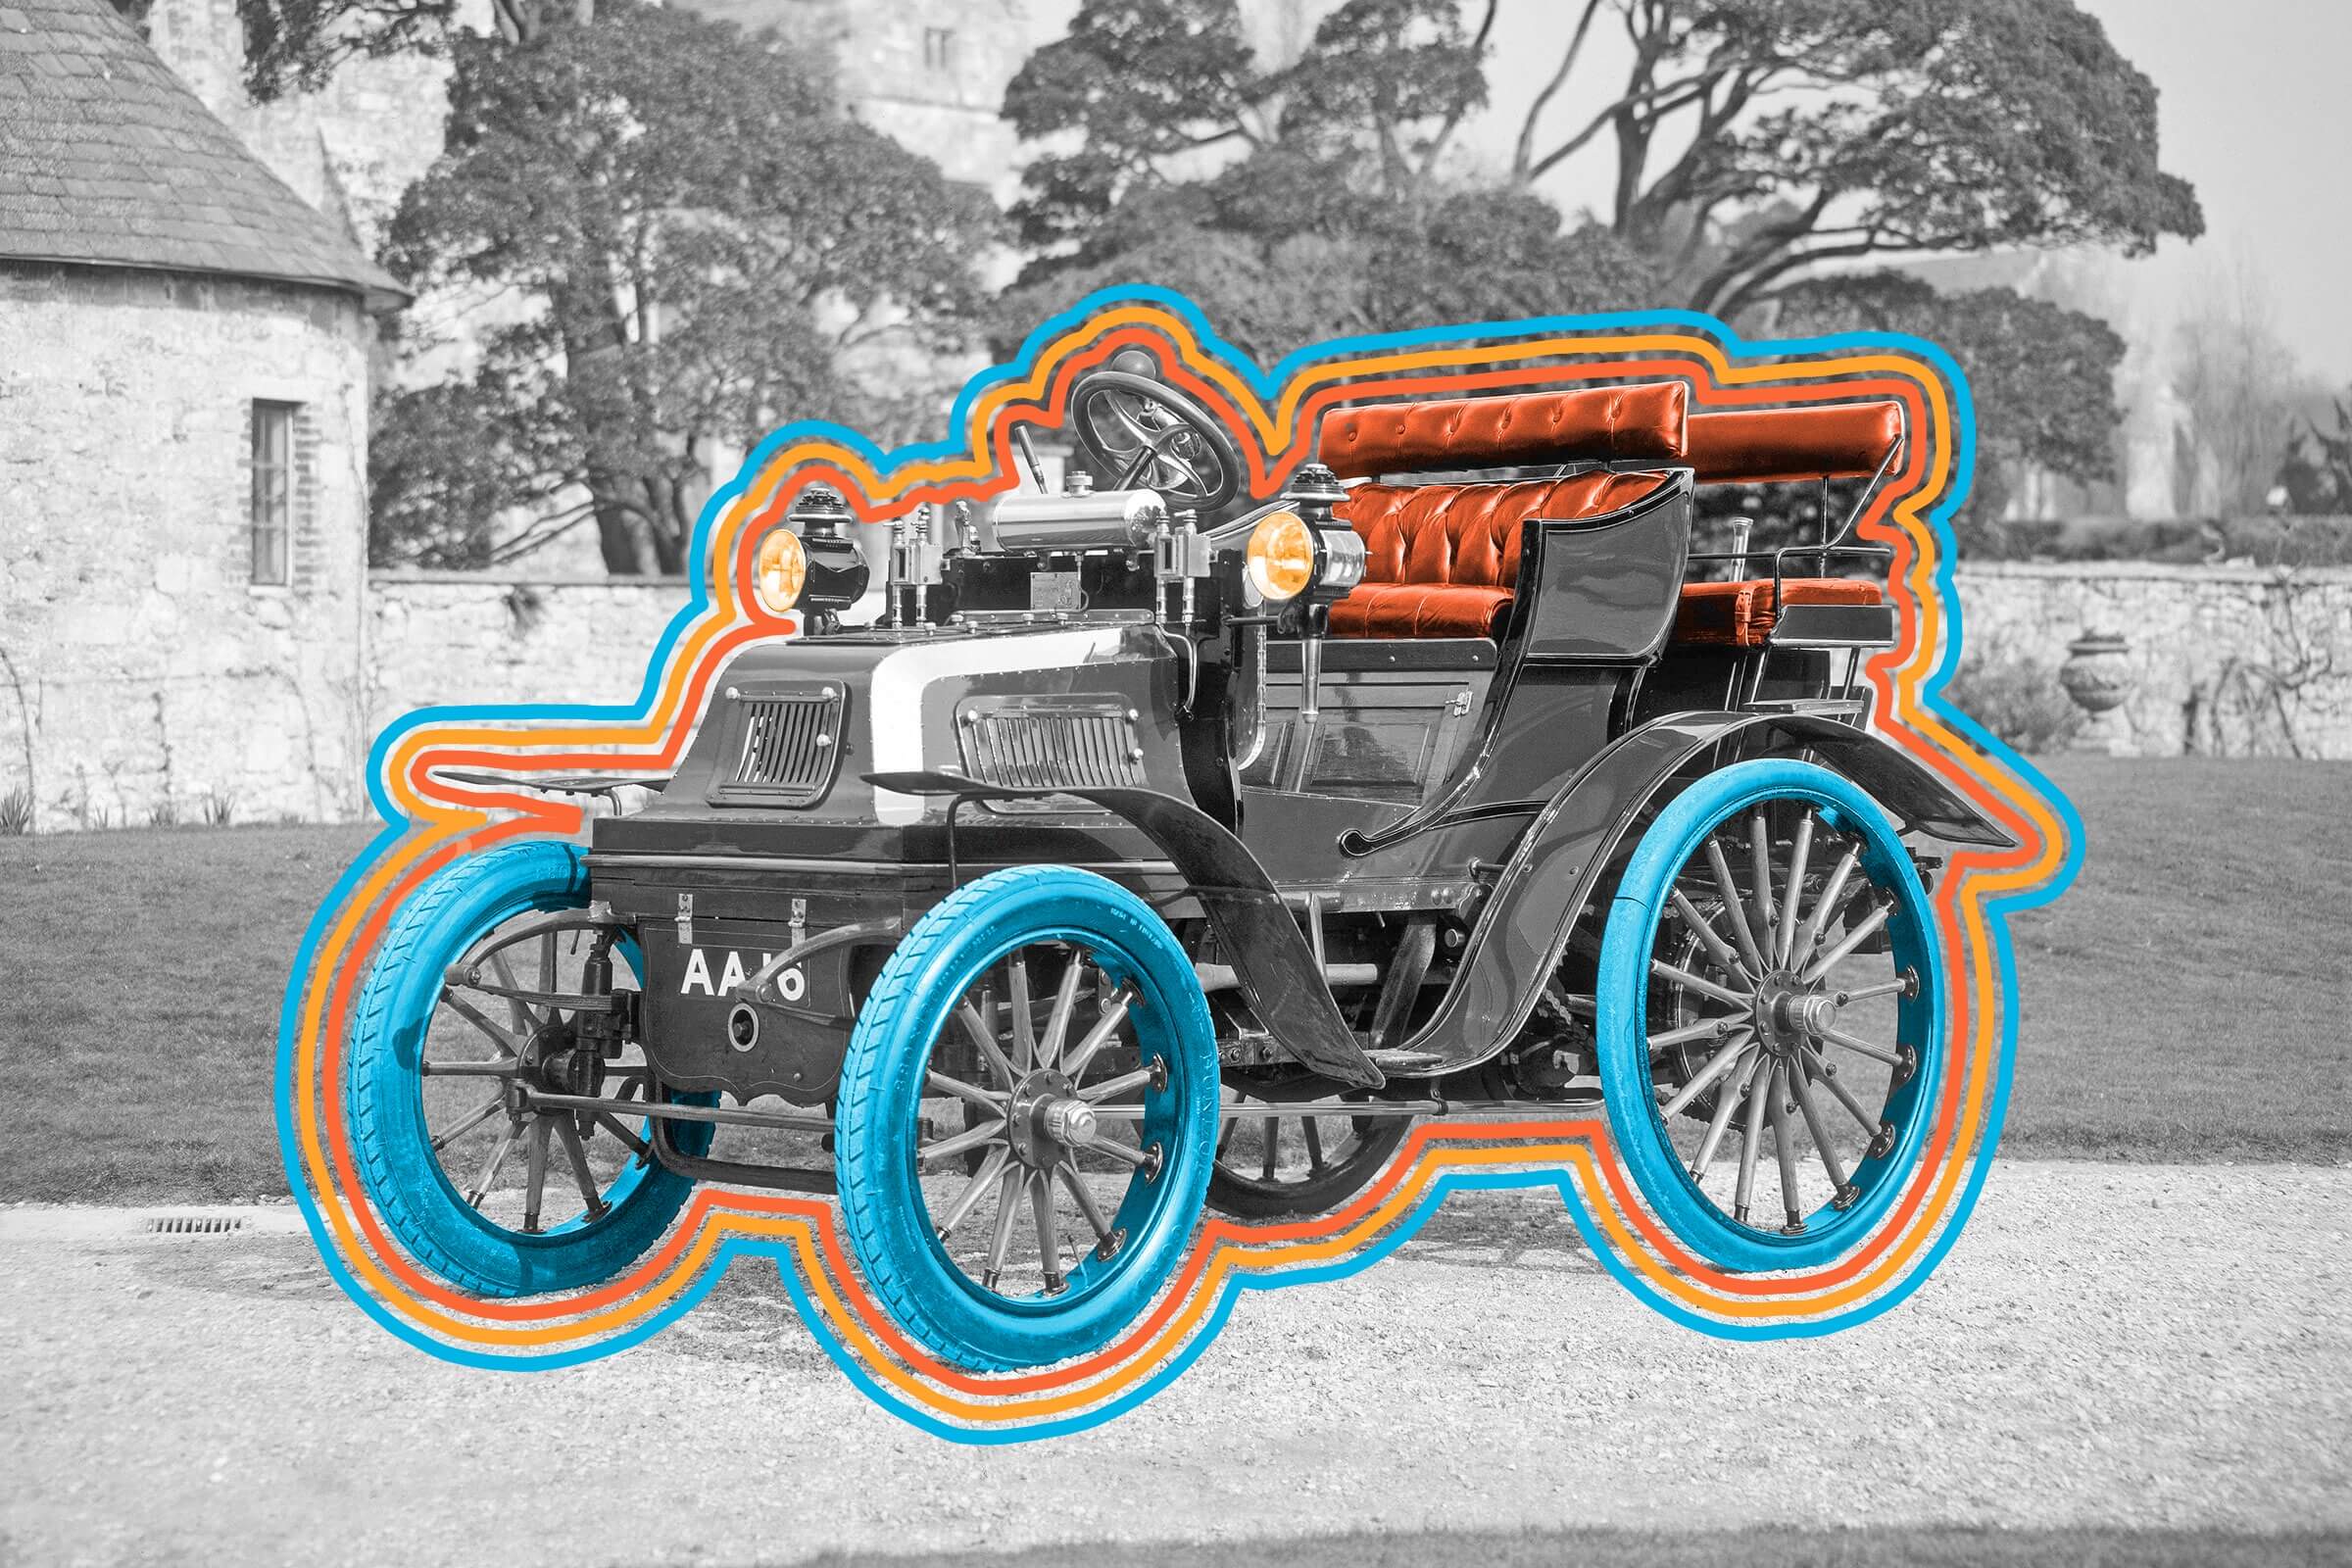 In 1900, about a third of vehicles were electric.